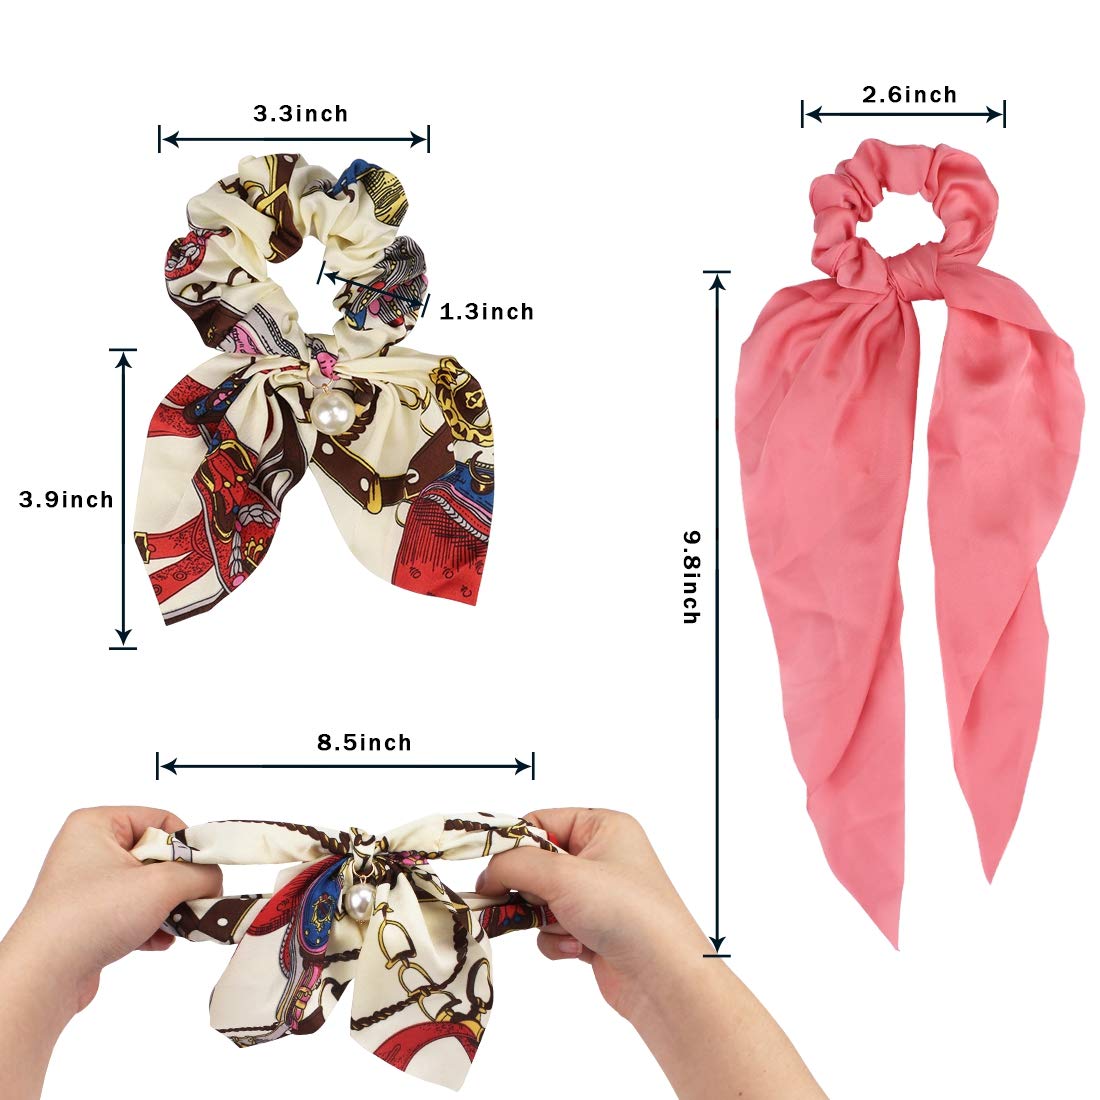 ANBALA Satin Ribbon Hair Scrunchies,10Pcs Bow Scarf Scrunchies, Thin Cold Scrunchies with Tail, Hair Ties Accessories for Girls Women Long Scrunchies Hair Scarves (5 Floral + 5 Solid Color Scrunchies)